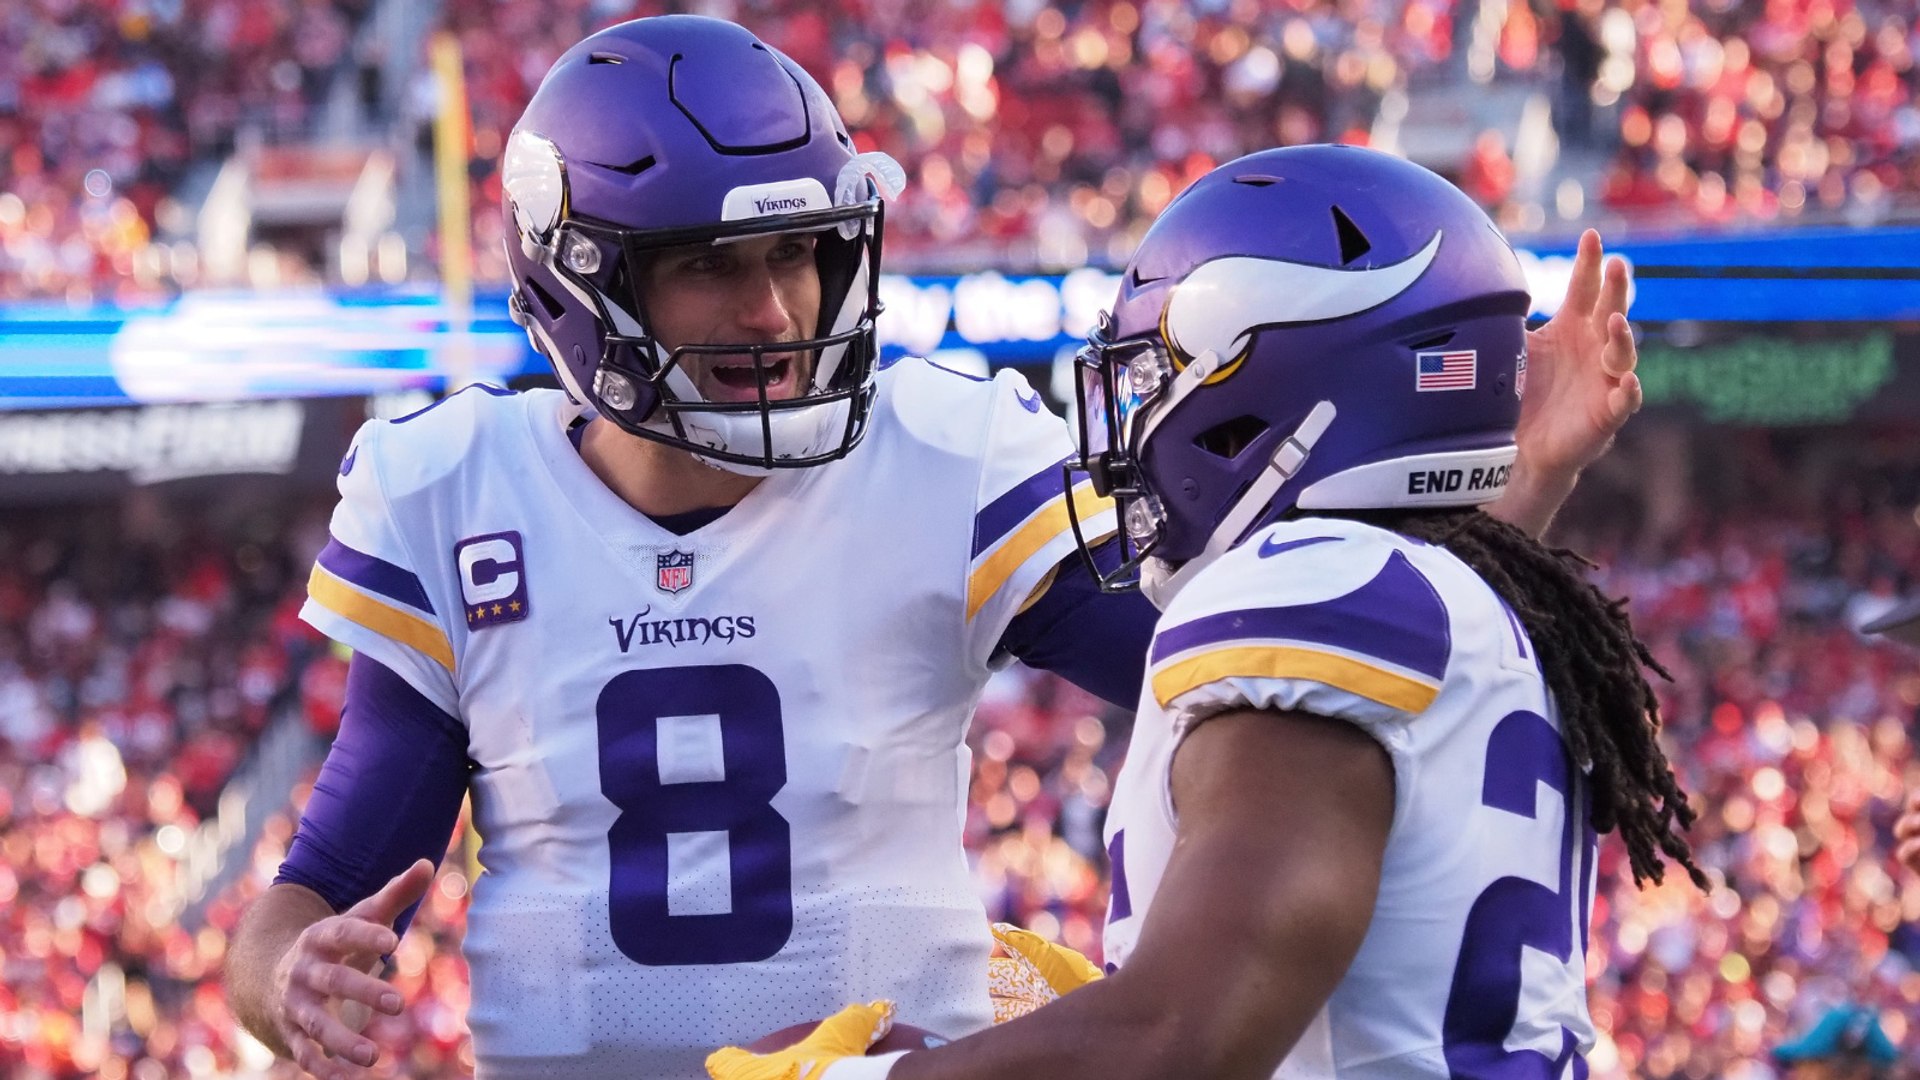 The Eagles versus the Vikings in the NFC Championship game - video